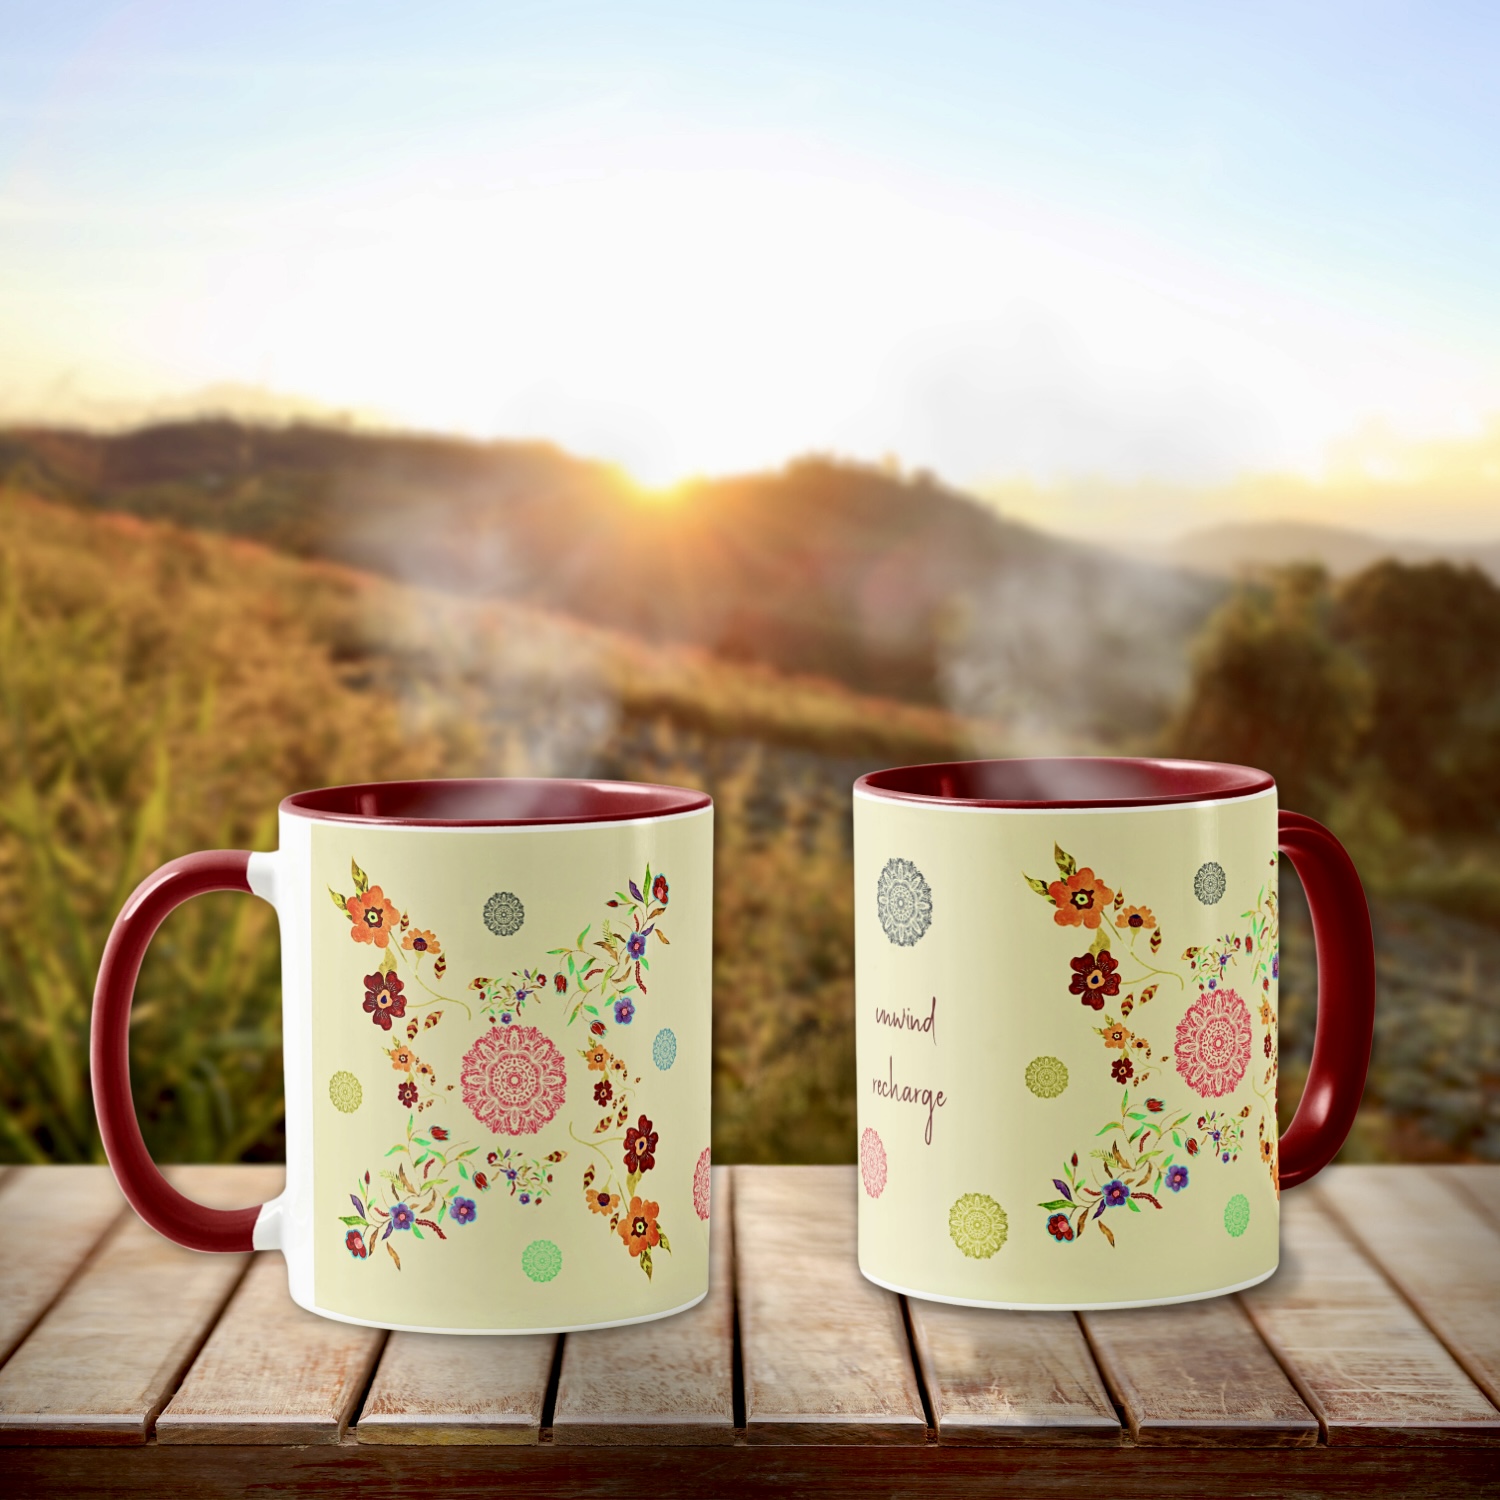 Serene coffee mug featuring intricate watercolor flower designs and a coral-toned mandala, evoking elegance and tranquility.